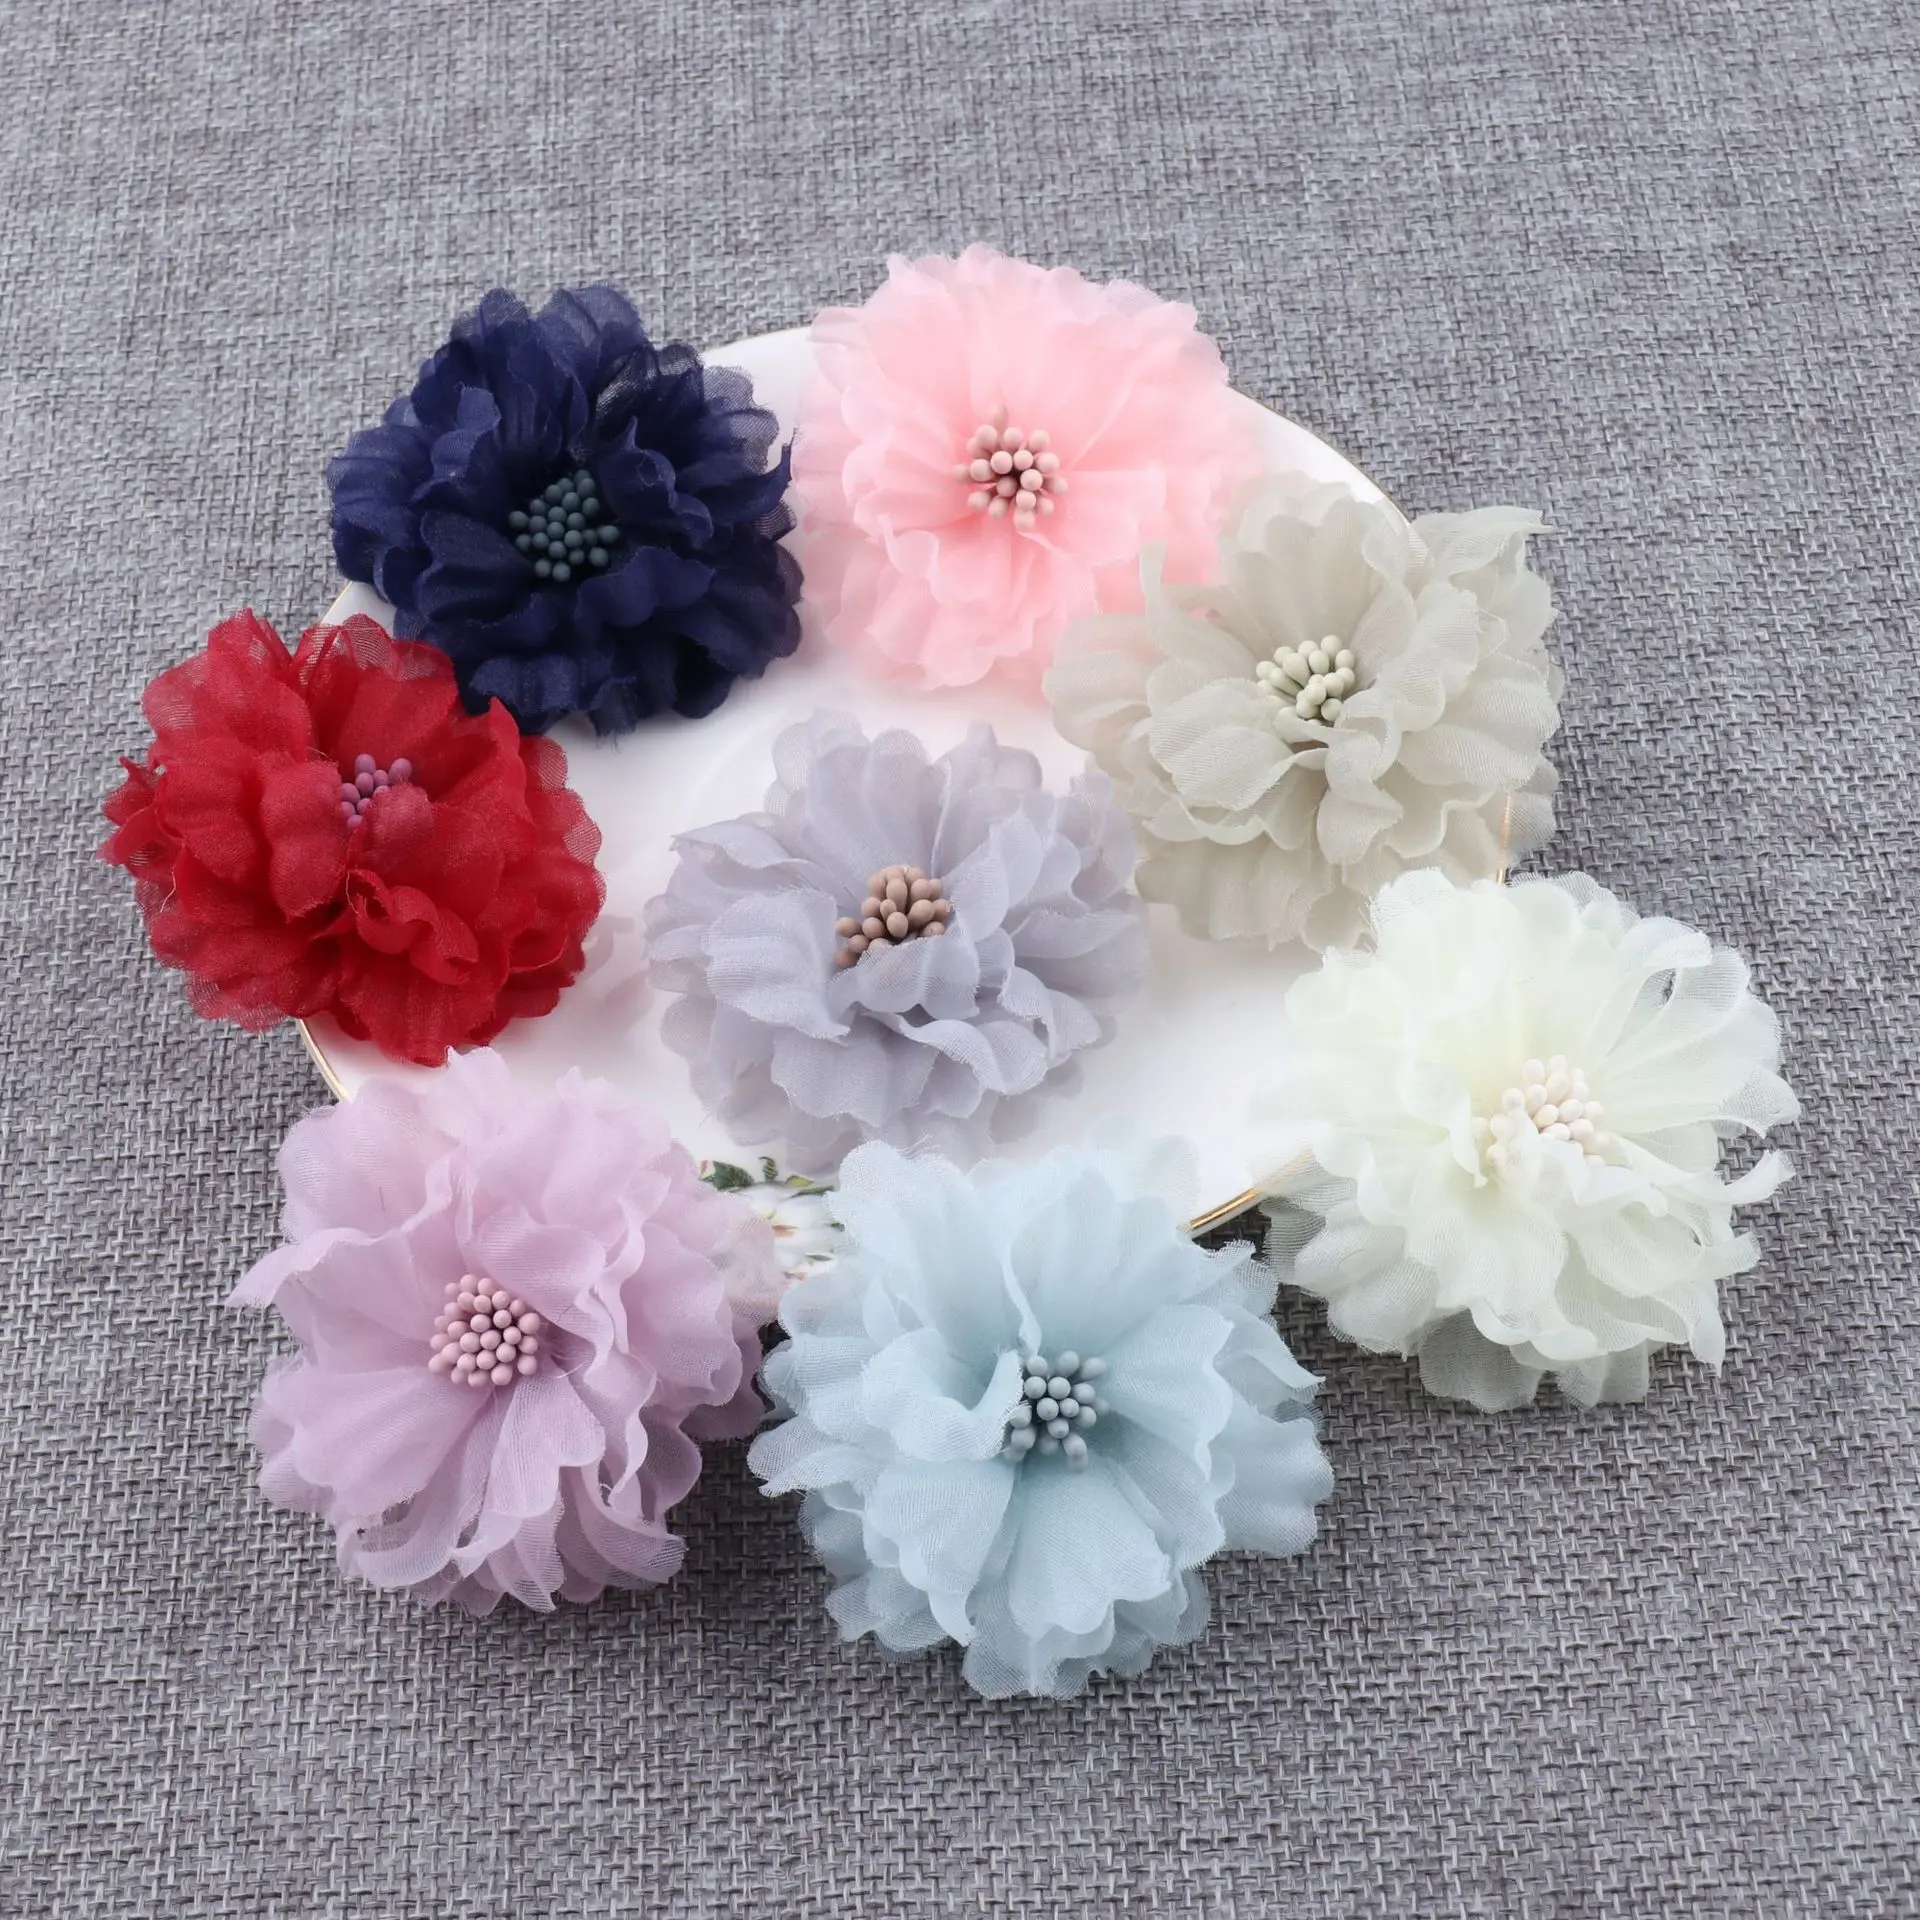 100pcs Fabric Artificial Lace Flower Chiffon Flower For Hair Accessories Headband Patch Applique Wedding Dress DIY Shoes Flower bohemian nature hair accessories toothed non slip hairband wig twist braid hair hoop artificial fishbone style braided headband